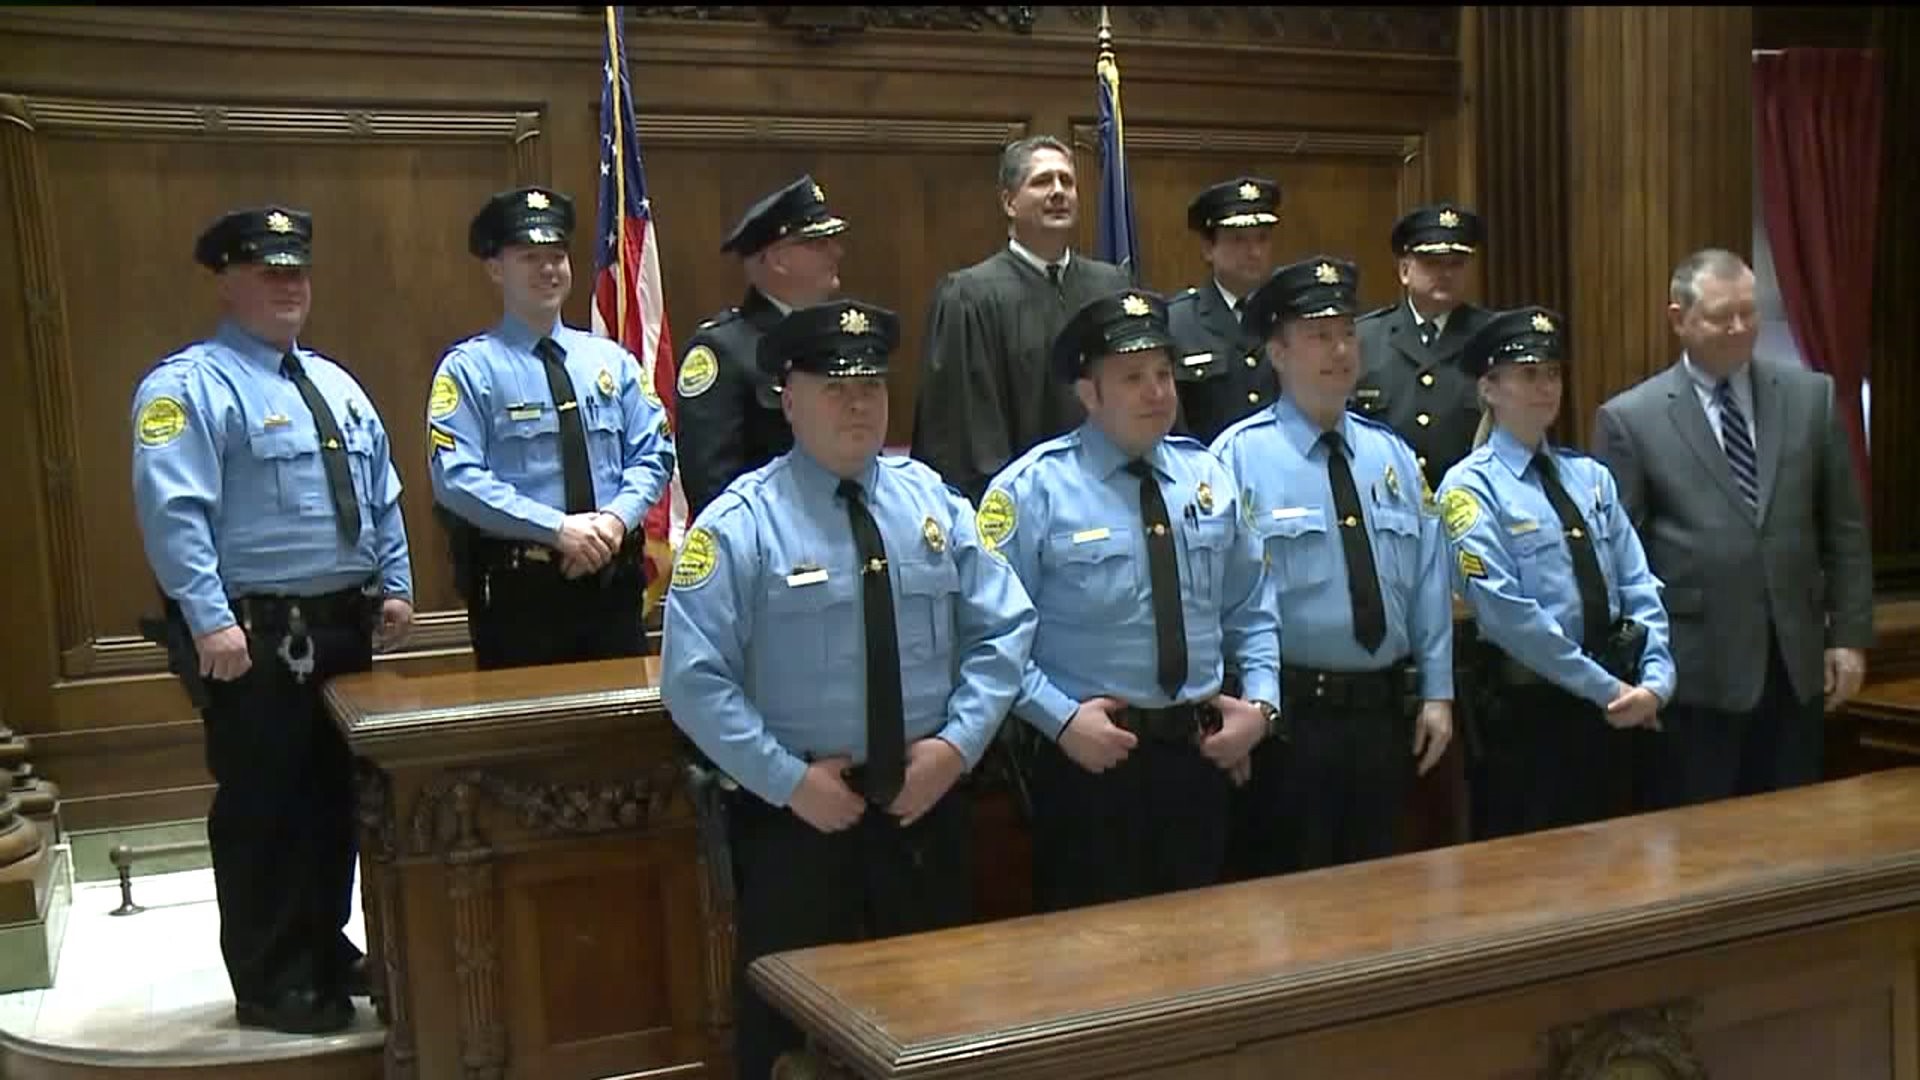 Wilkes University Swears in its First Police Officers